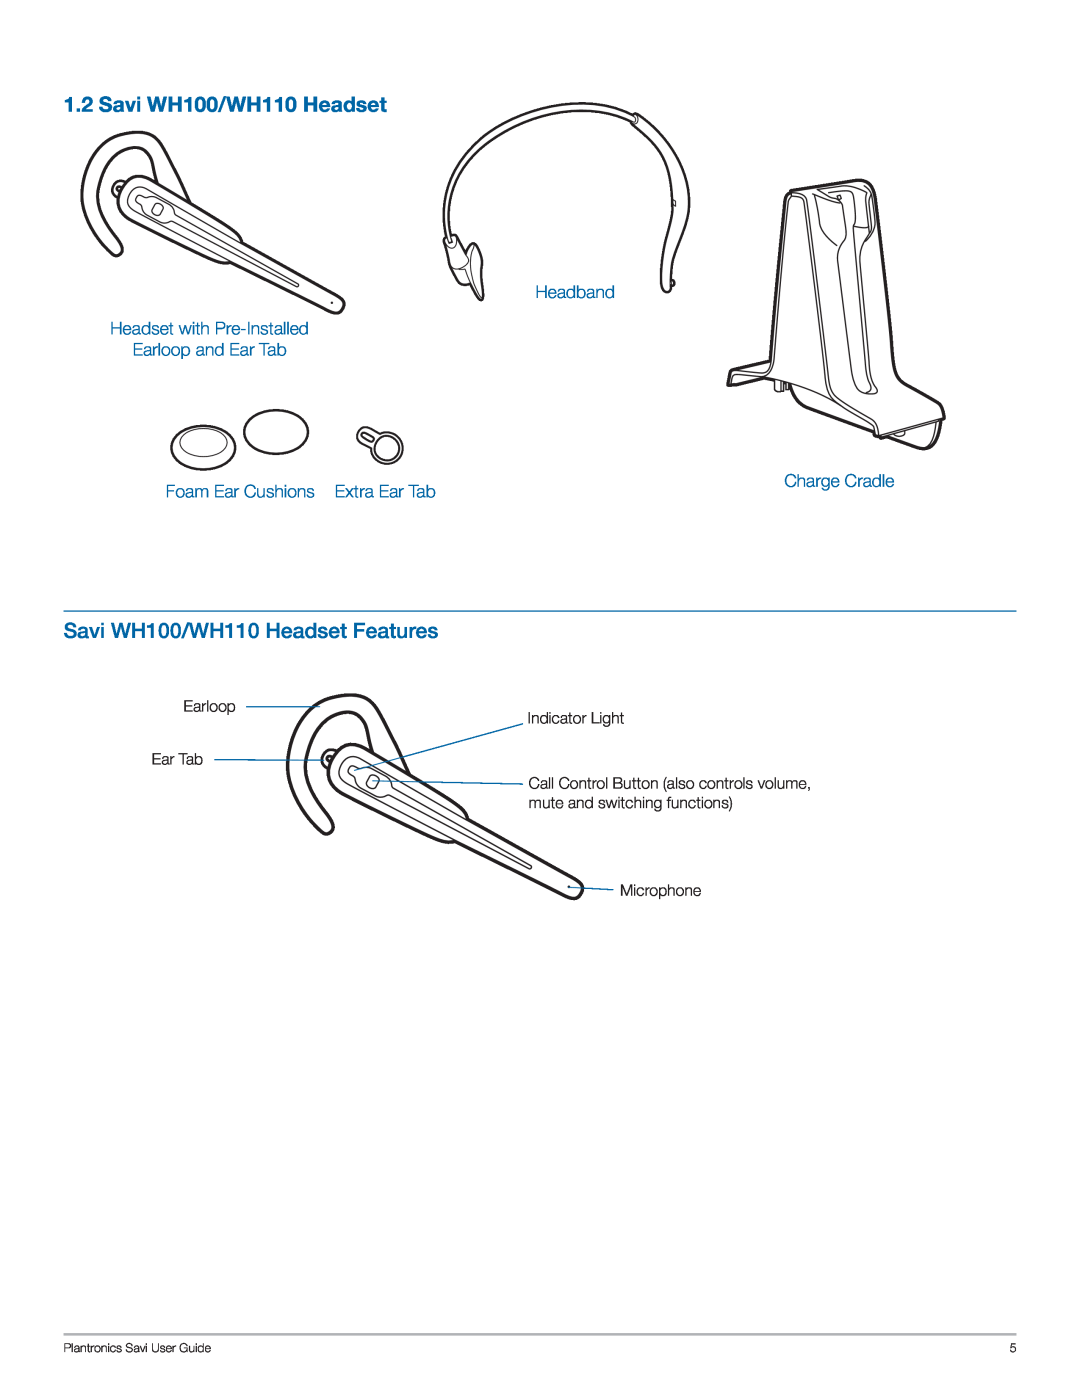 Plantronics WO100 manual Savi WH100/WH110 Headset Features, Headband Headset with Pre-Installed Earloop and Ear Tab 